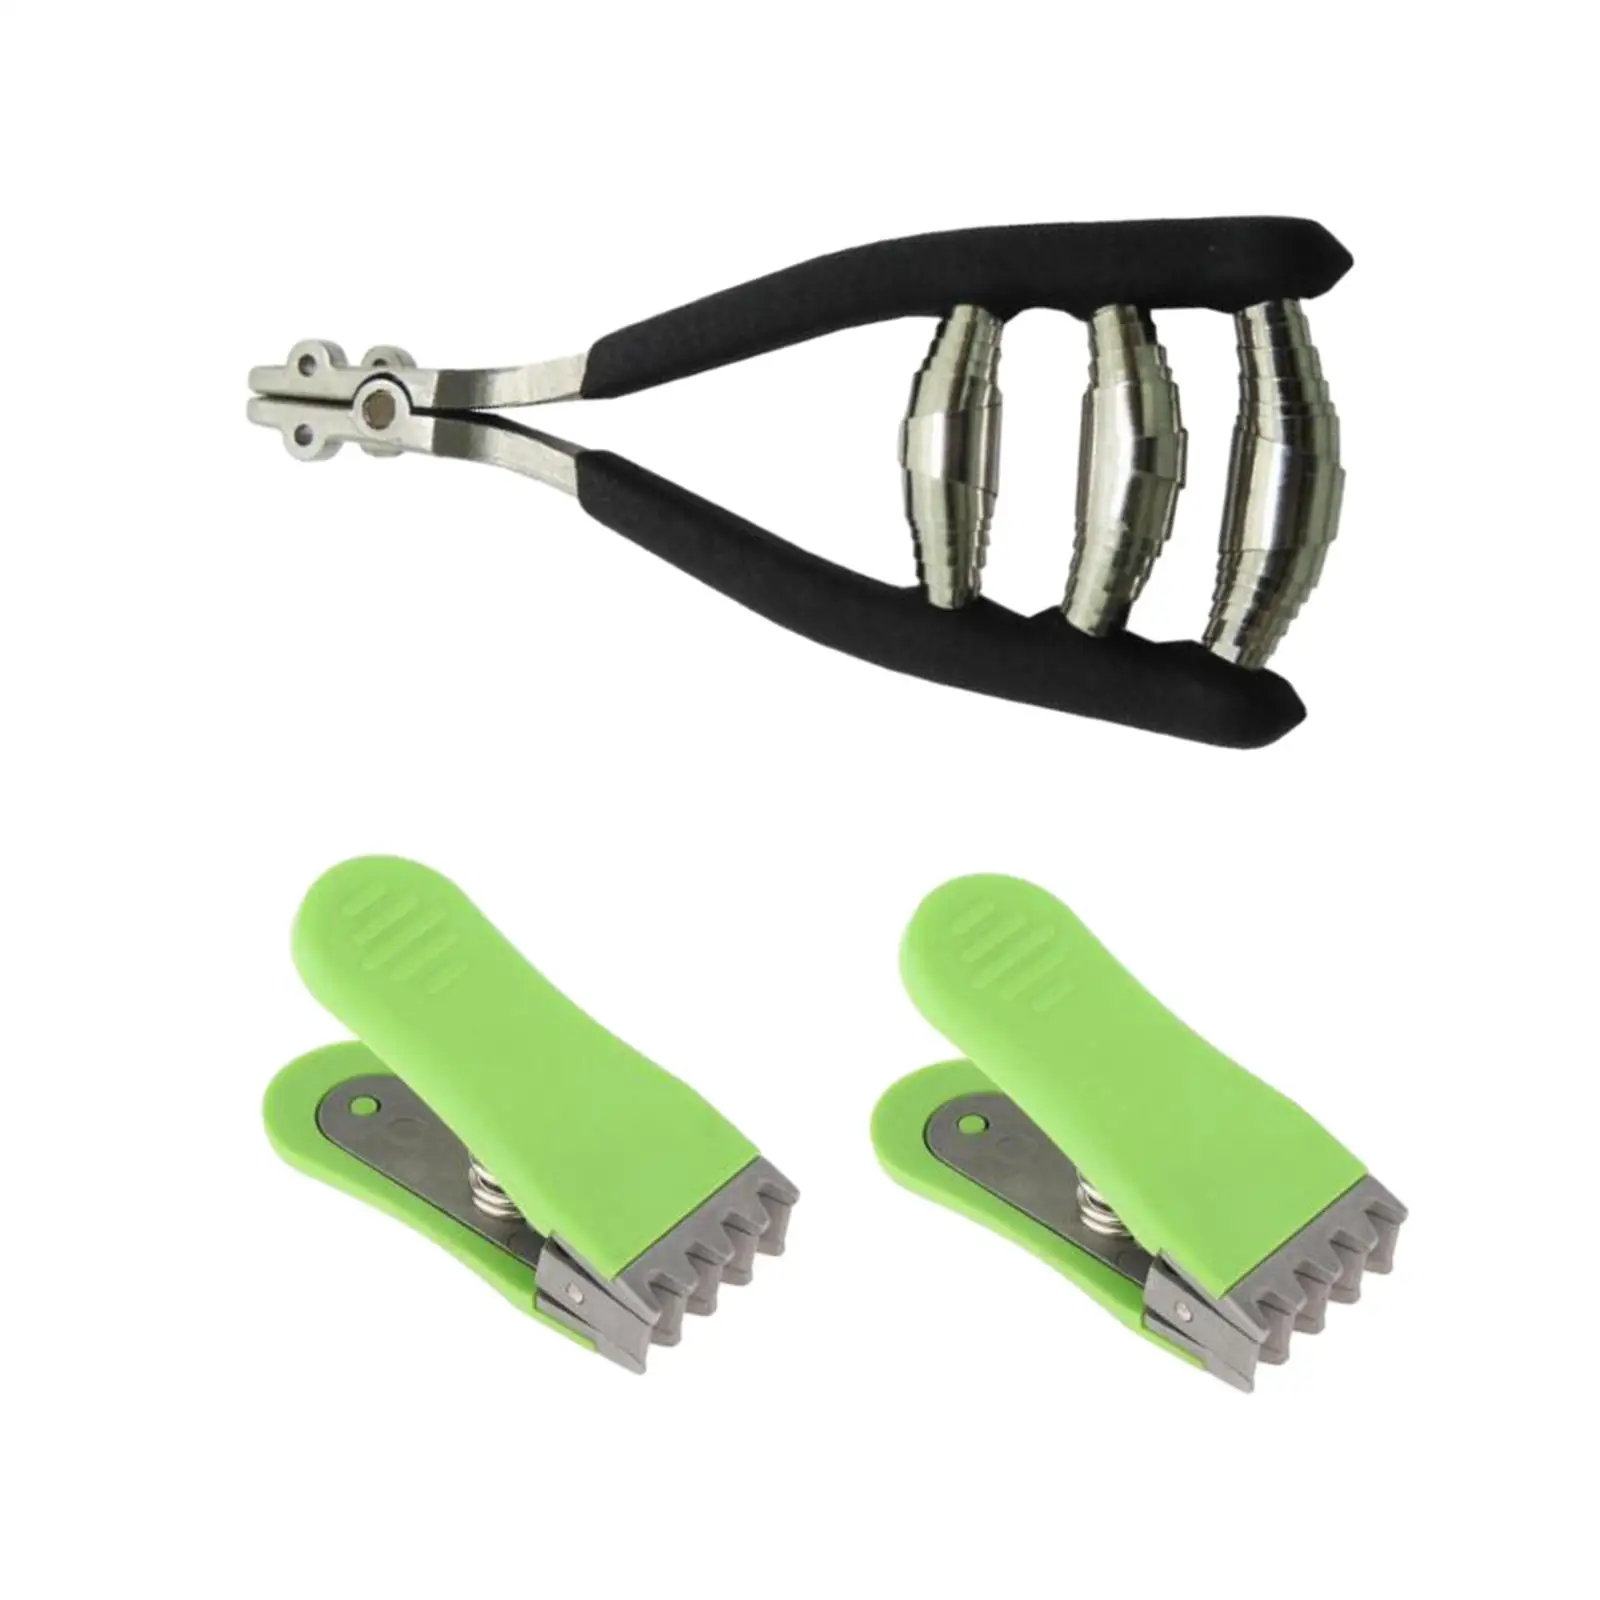 Sports Starting Clamp Wide Head 3 Spring Starter Clamp Aluminum Alloy Badminton Racket Starter Clamp for Racket Squash Tennis